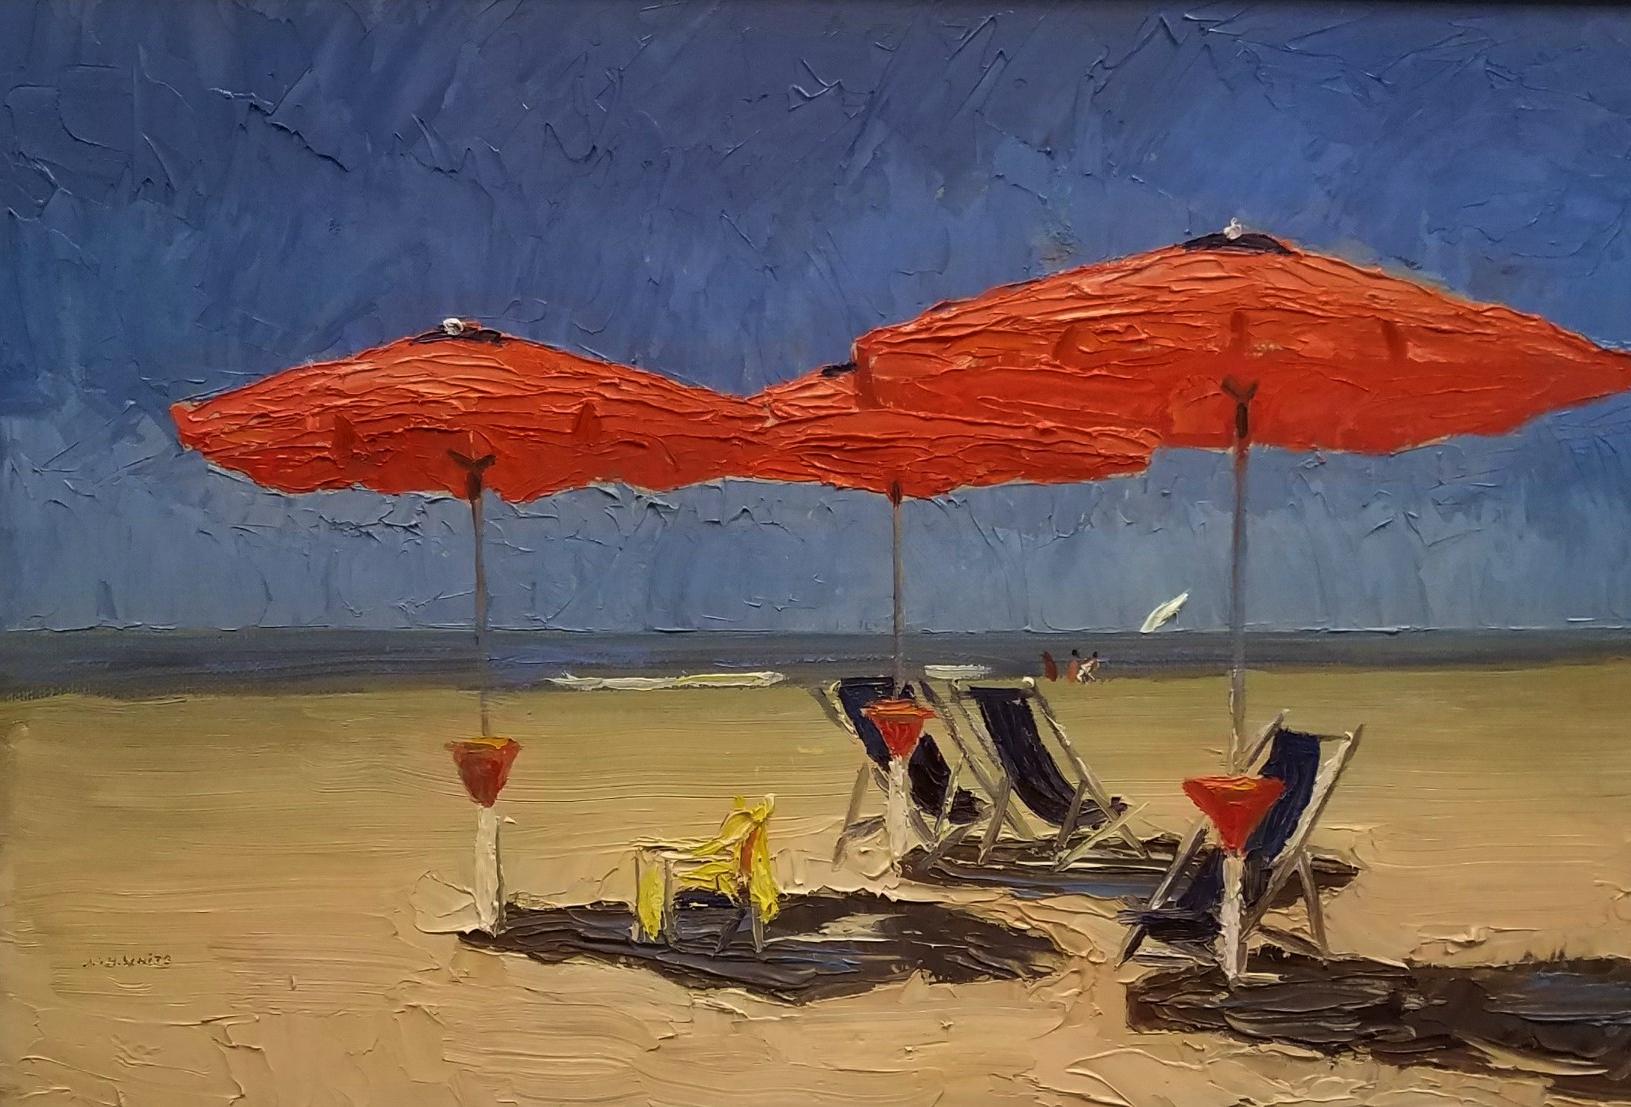 Nelson H. White Landscape Painting - The Red Umbrellas, Italian Beach, Individual Style, Outdoor and Nature 